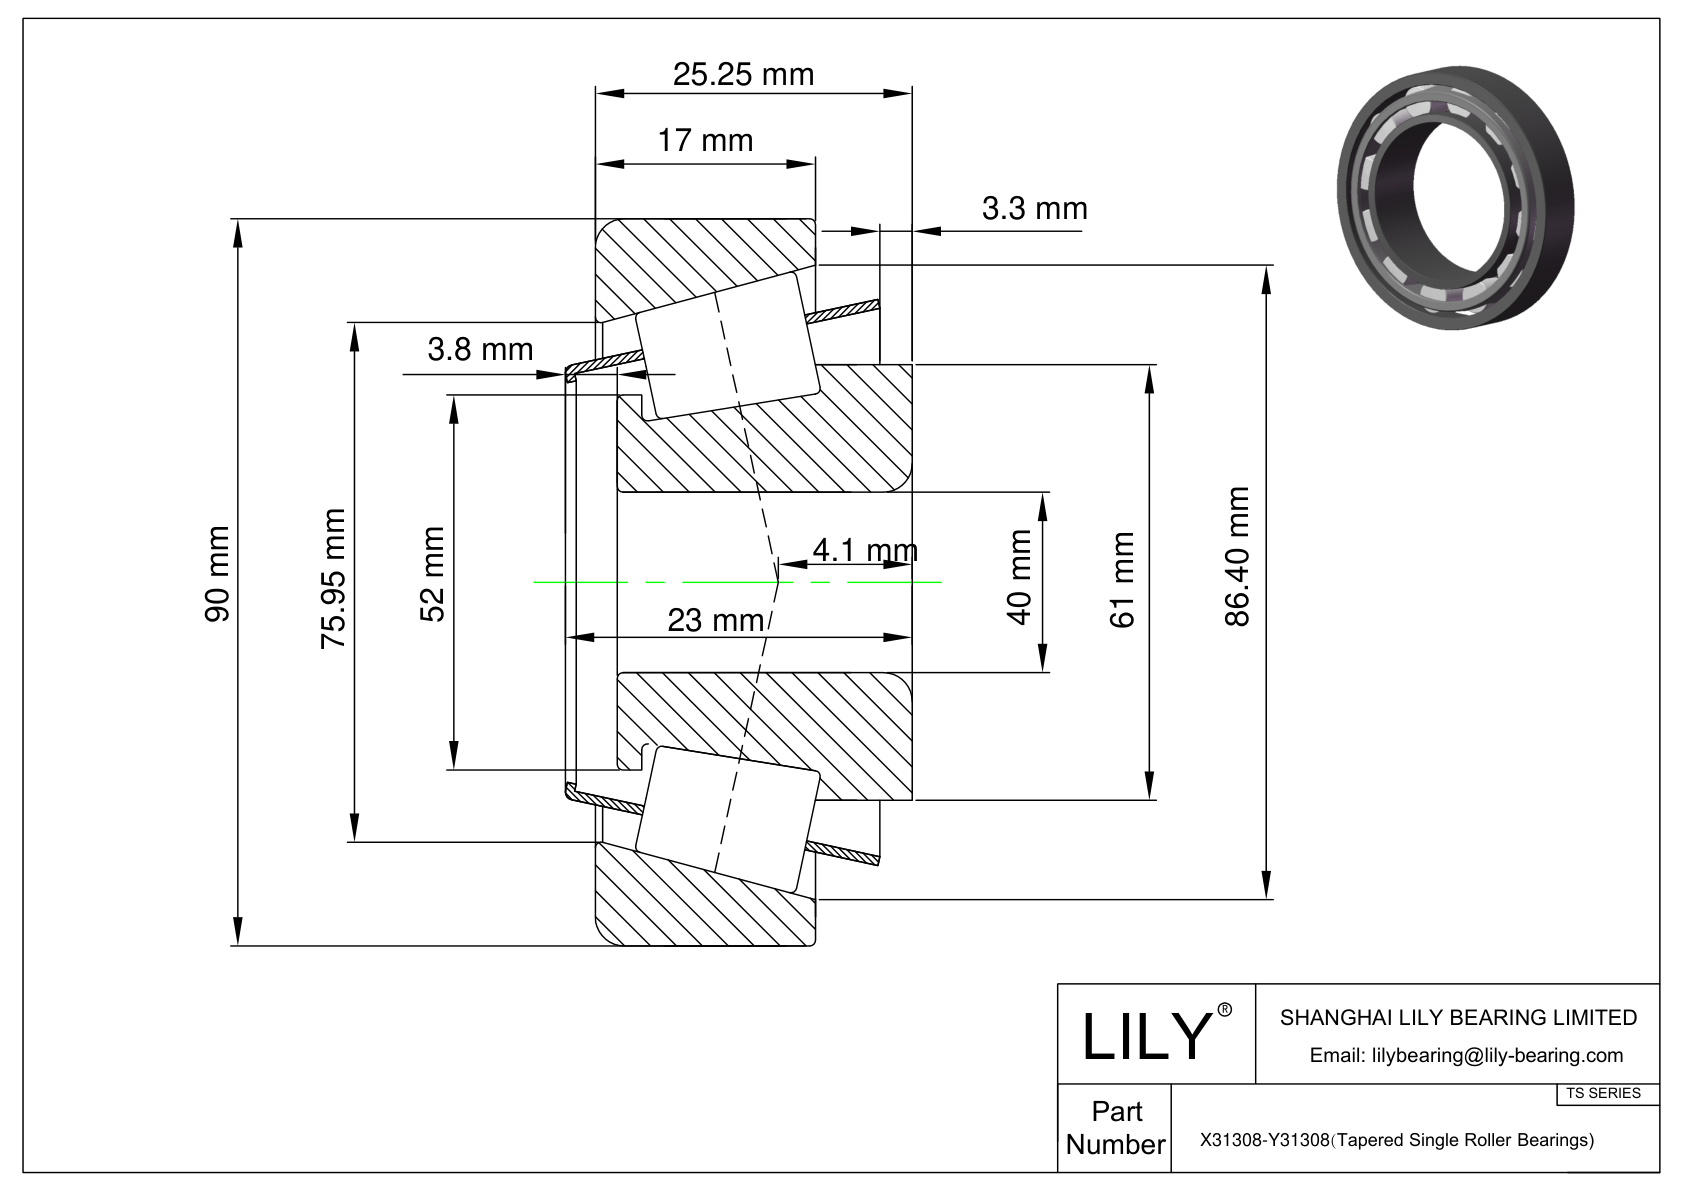 X31308-Y31308 TS (Tapered Single Roller Bearings) (Metric) cad drawing